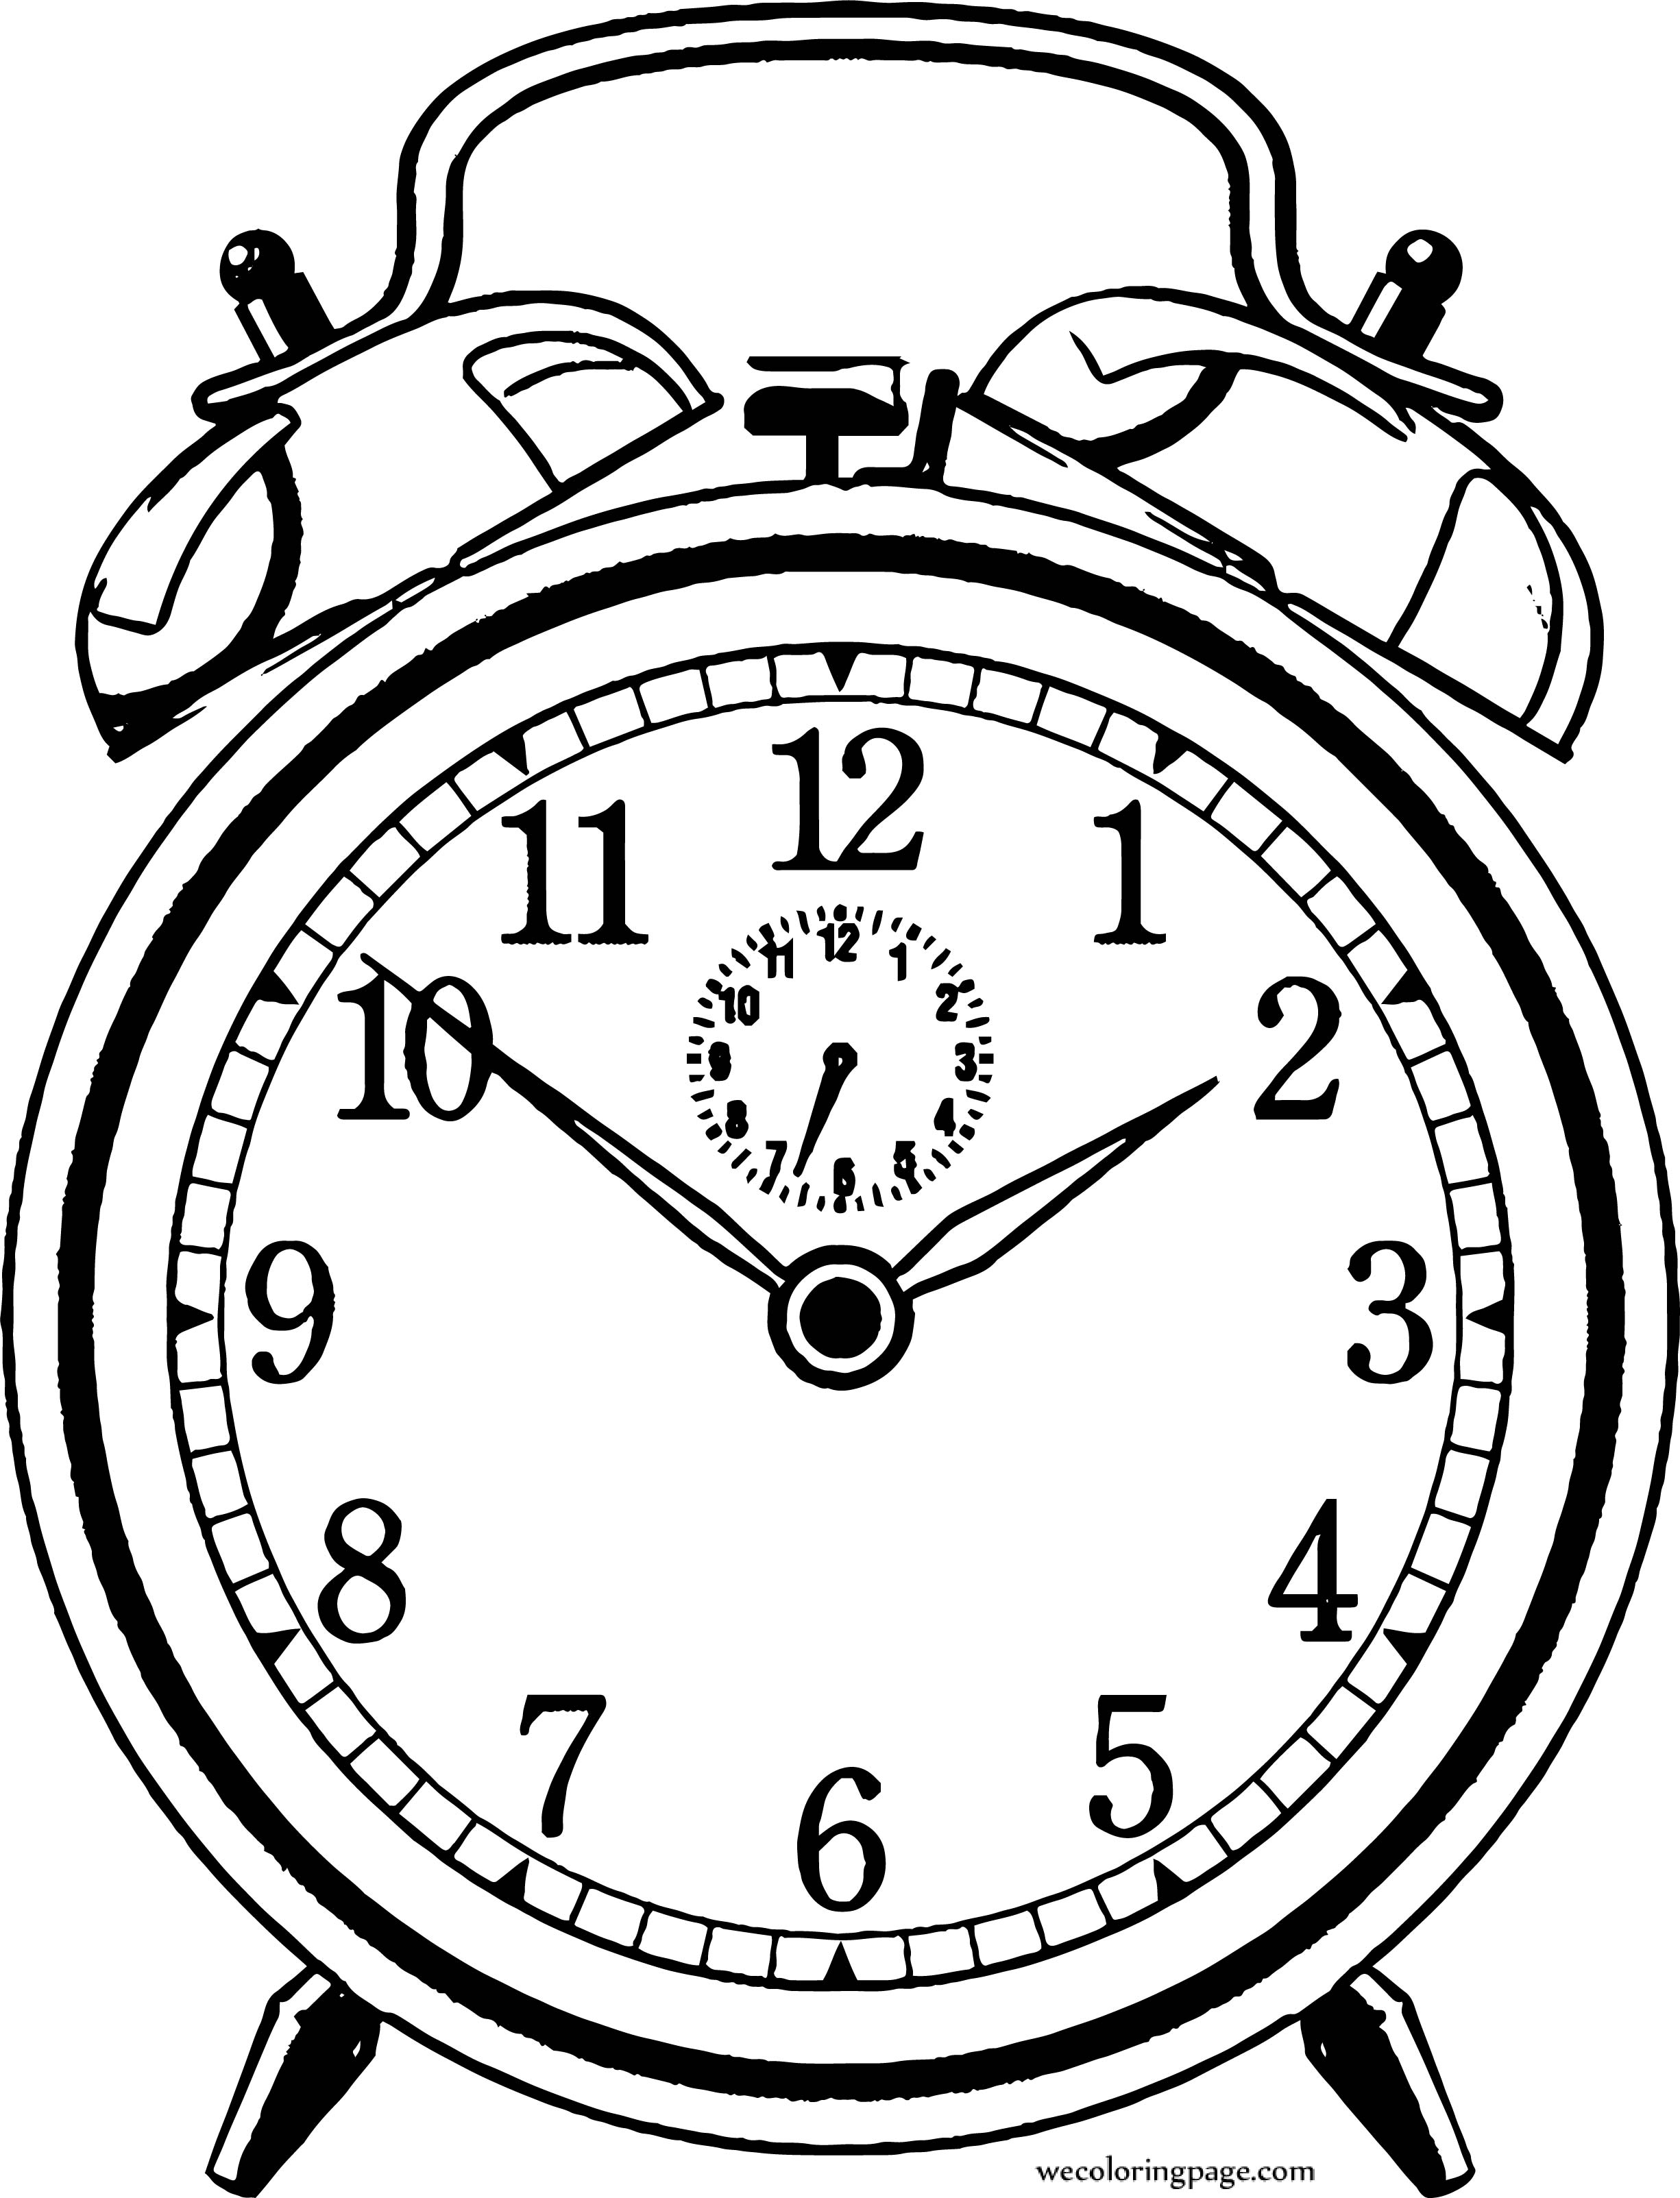 Free Old Clock Alarm Coloring Page | Wecoloringpage